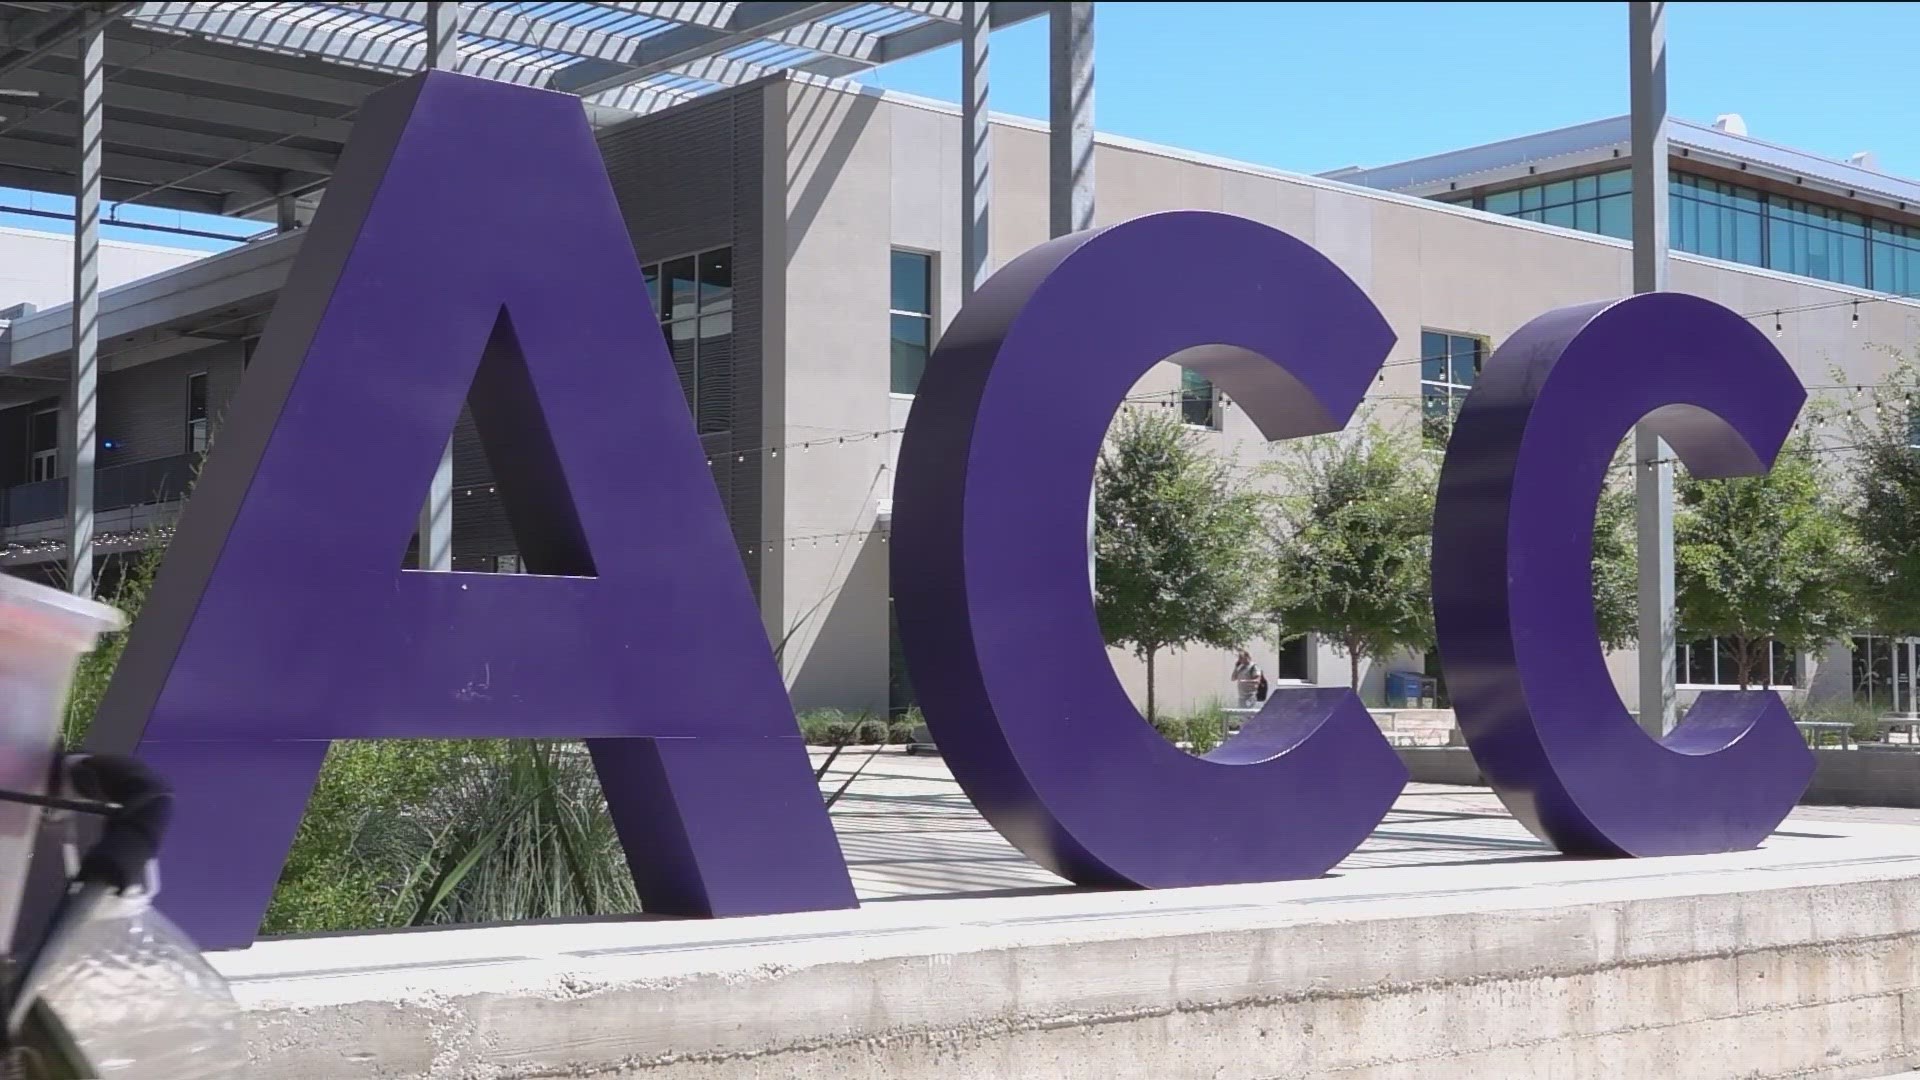 Austin Community College is looking to take a massive burden off students and families in Central Texas. ACC plans to expand its pilot program to offer free tuition.